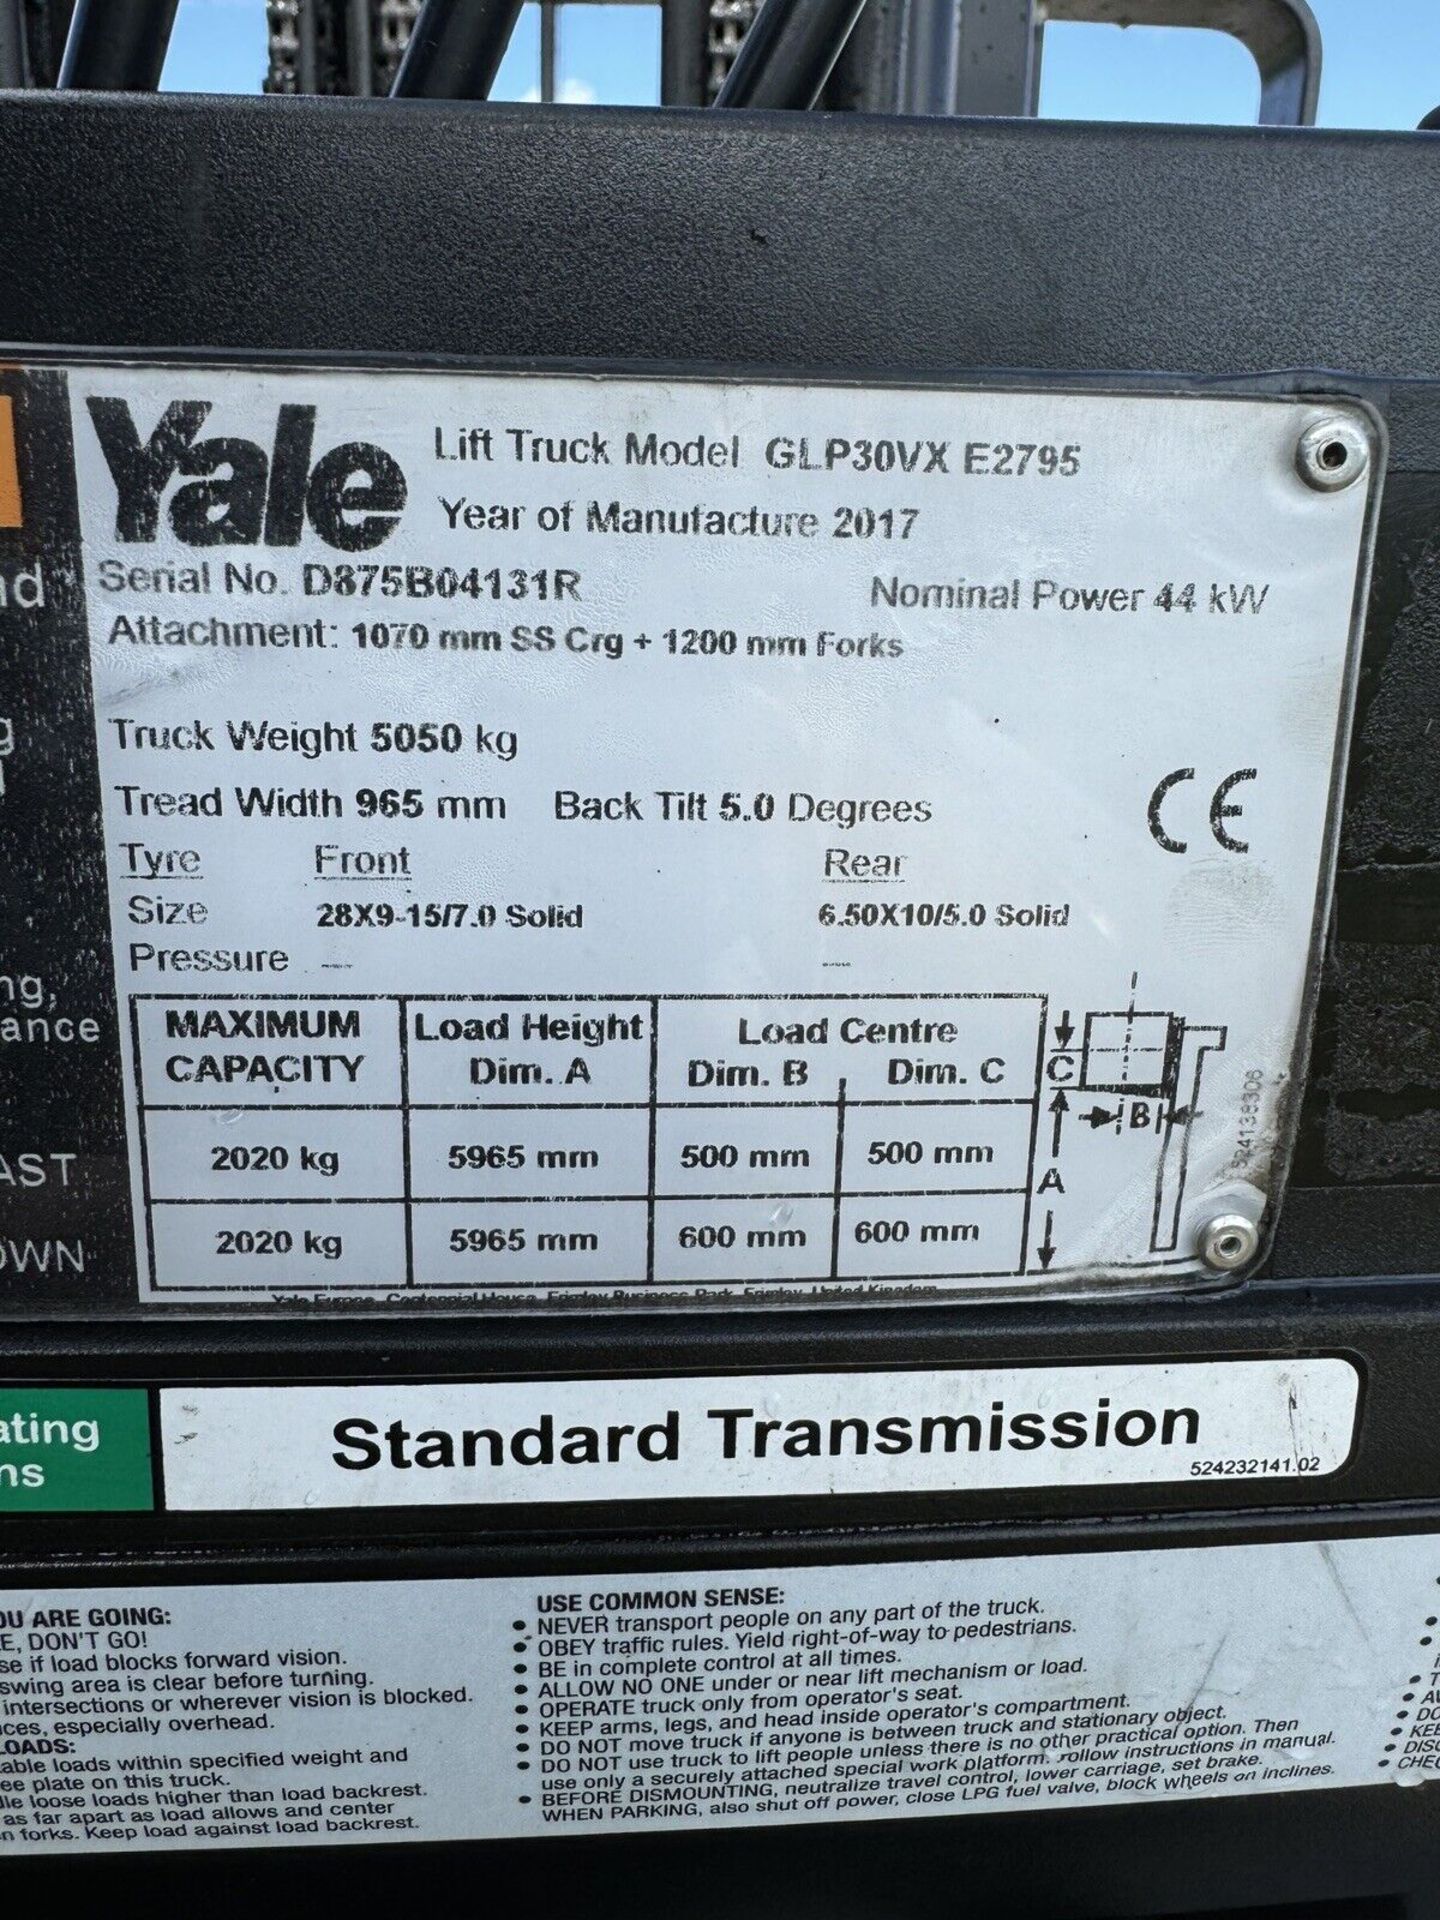 2017 - YALE Gas Forklift Truck (5.9 m lift) - Only 2200 Hours - Image 7 of 7